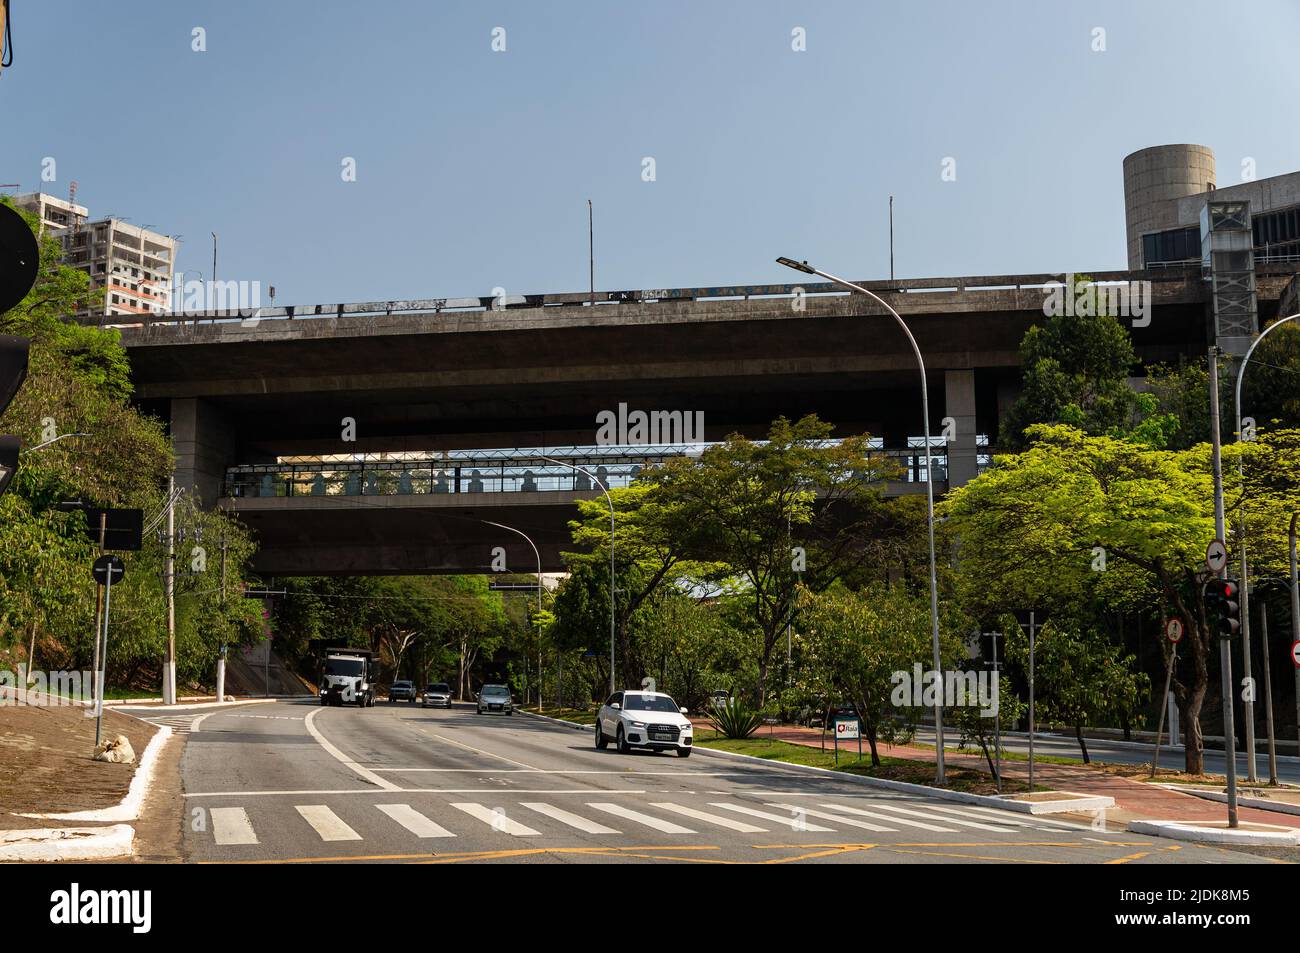 View of Capitao Adalberto Mendes viaduct over Paulo VI avenue and partial view of Sumare metro station (Line 2 - green) right below under sunny sky. Stock Photo